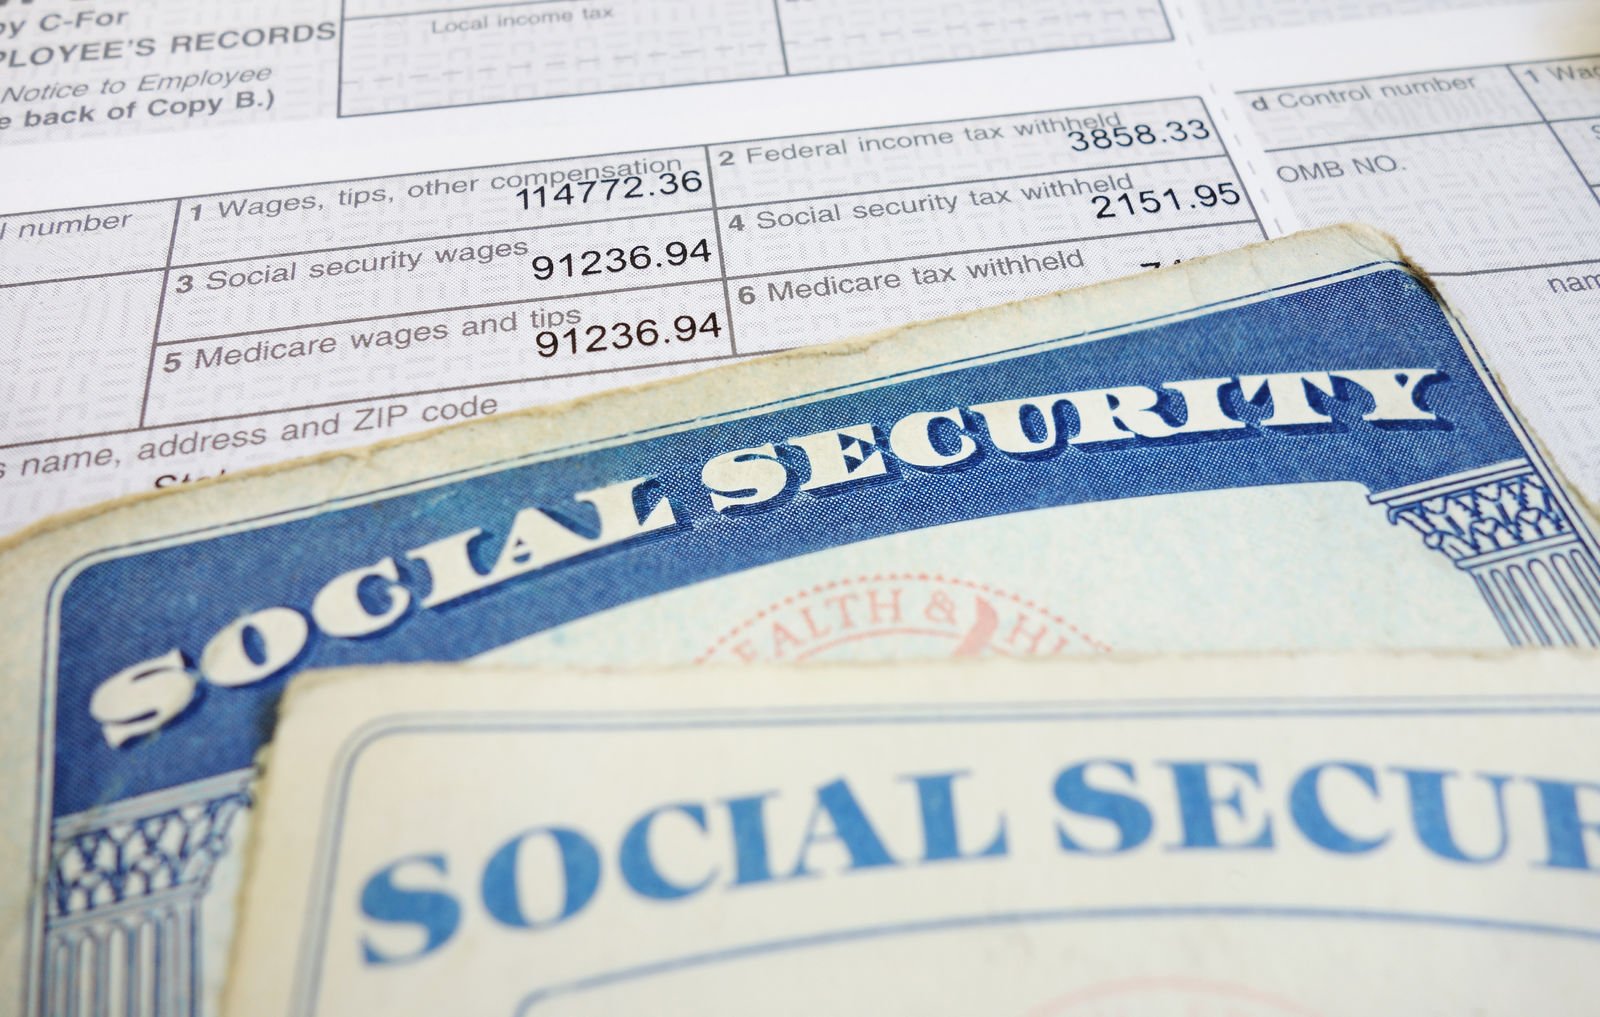 Does car insurance need a social security number?